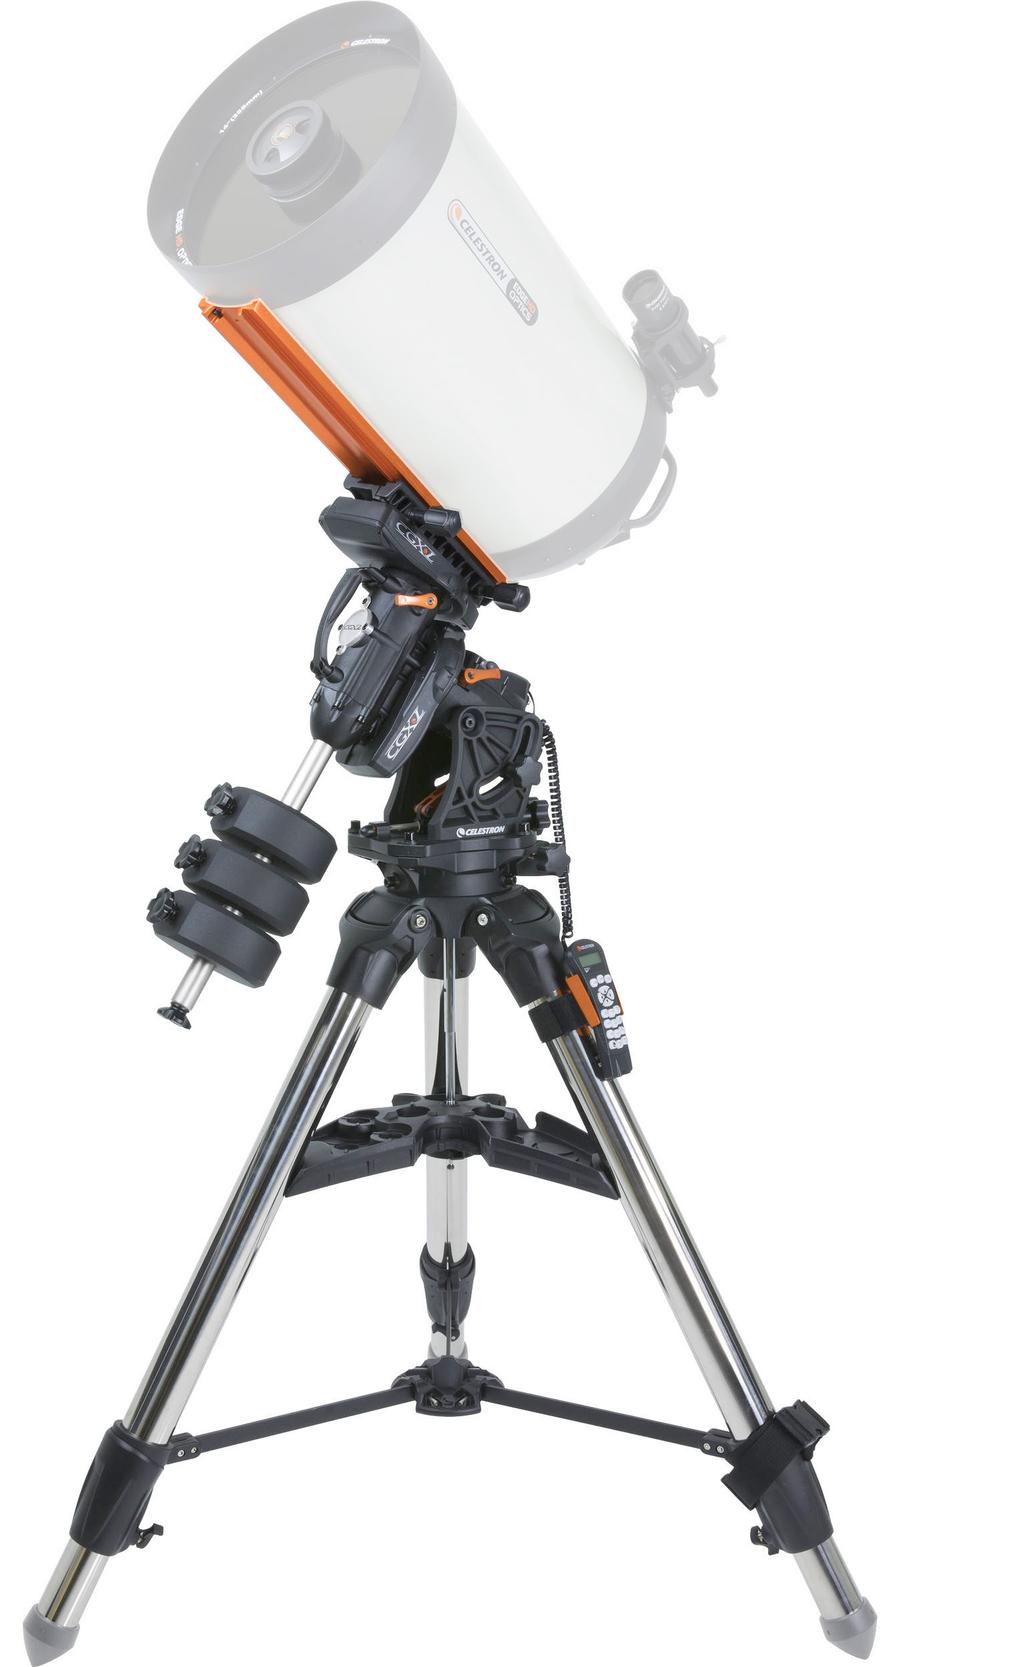 CELESTRON CGX-L MOUNT Celestron s new weightlifter: the CGX-L mount Damian Peach tries out Celestron s new heavyduty equatorial mount and discovers why it is a strong and steady powerlifter.